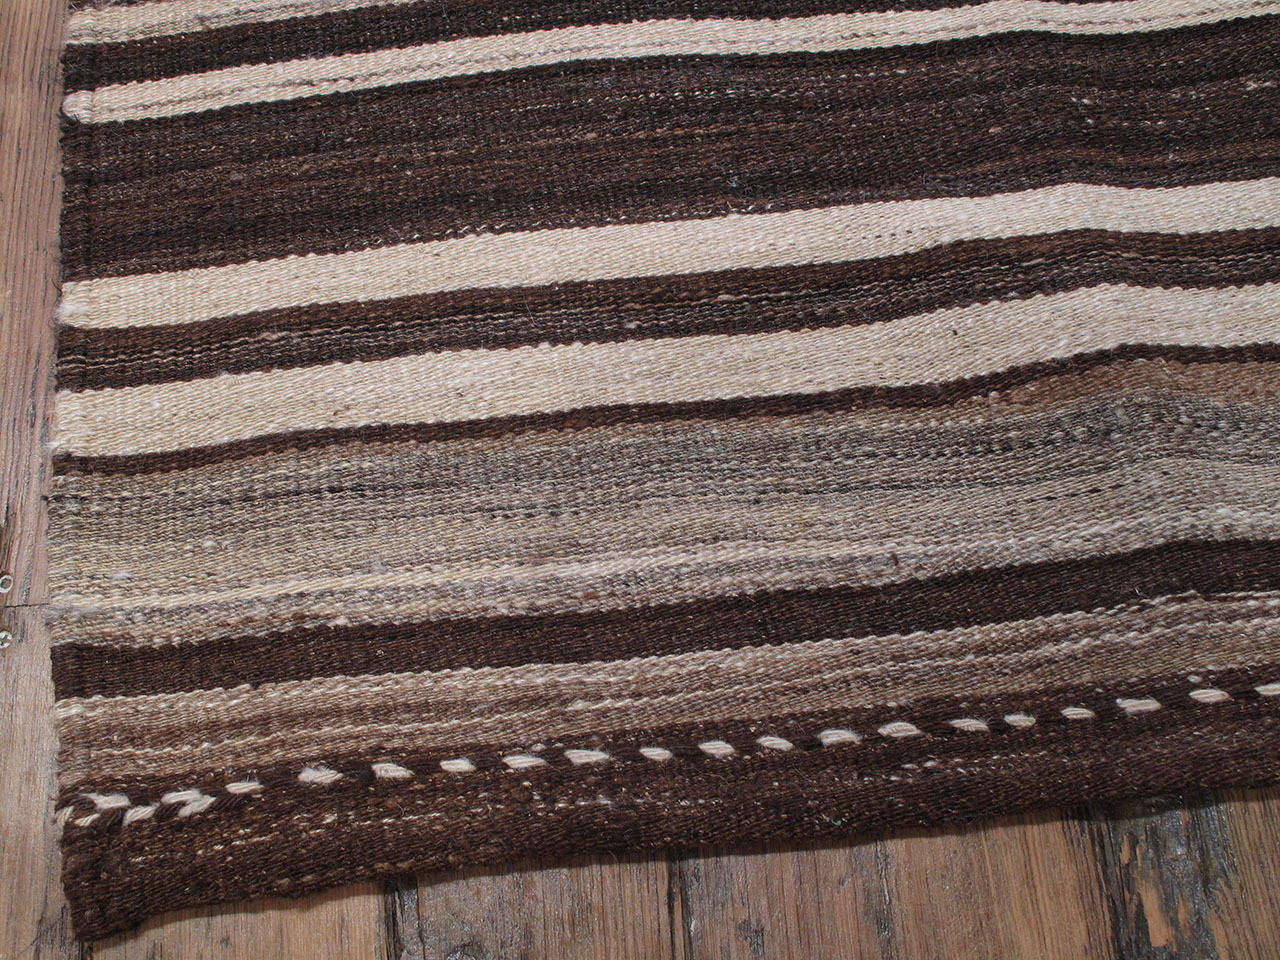 20th Century Banded Kilim in Natural Brown